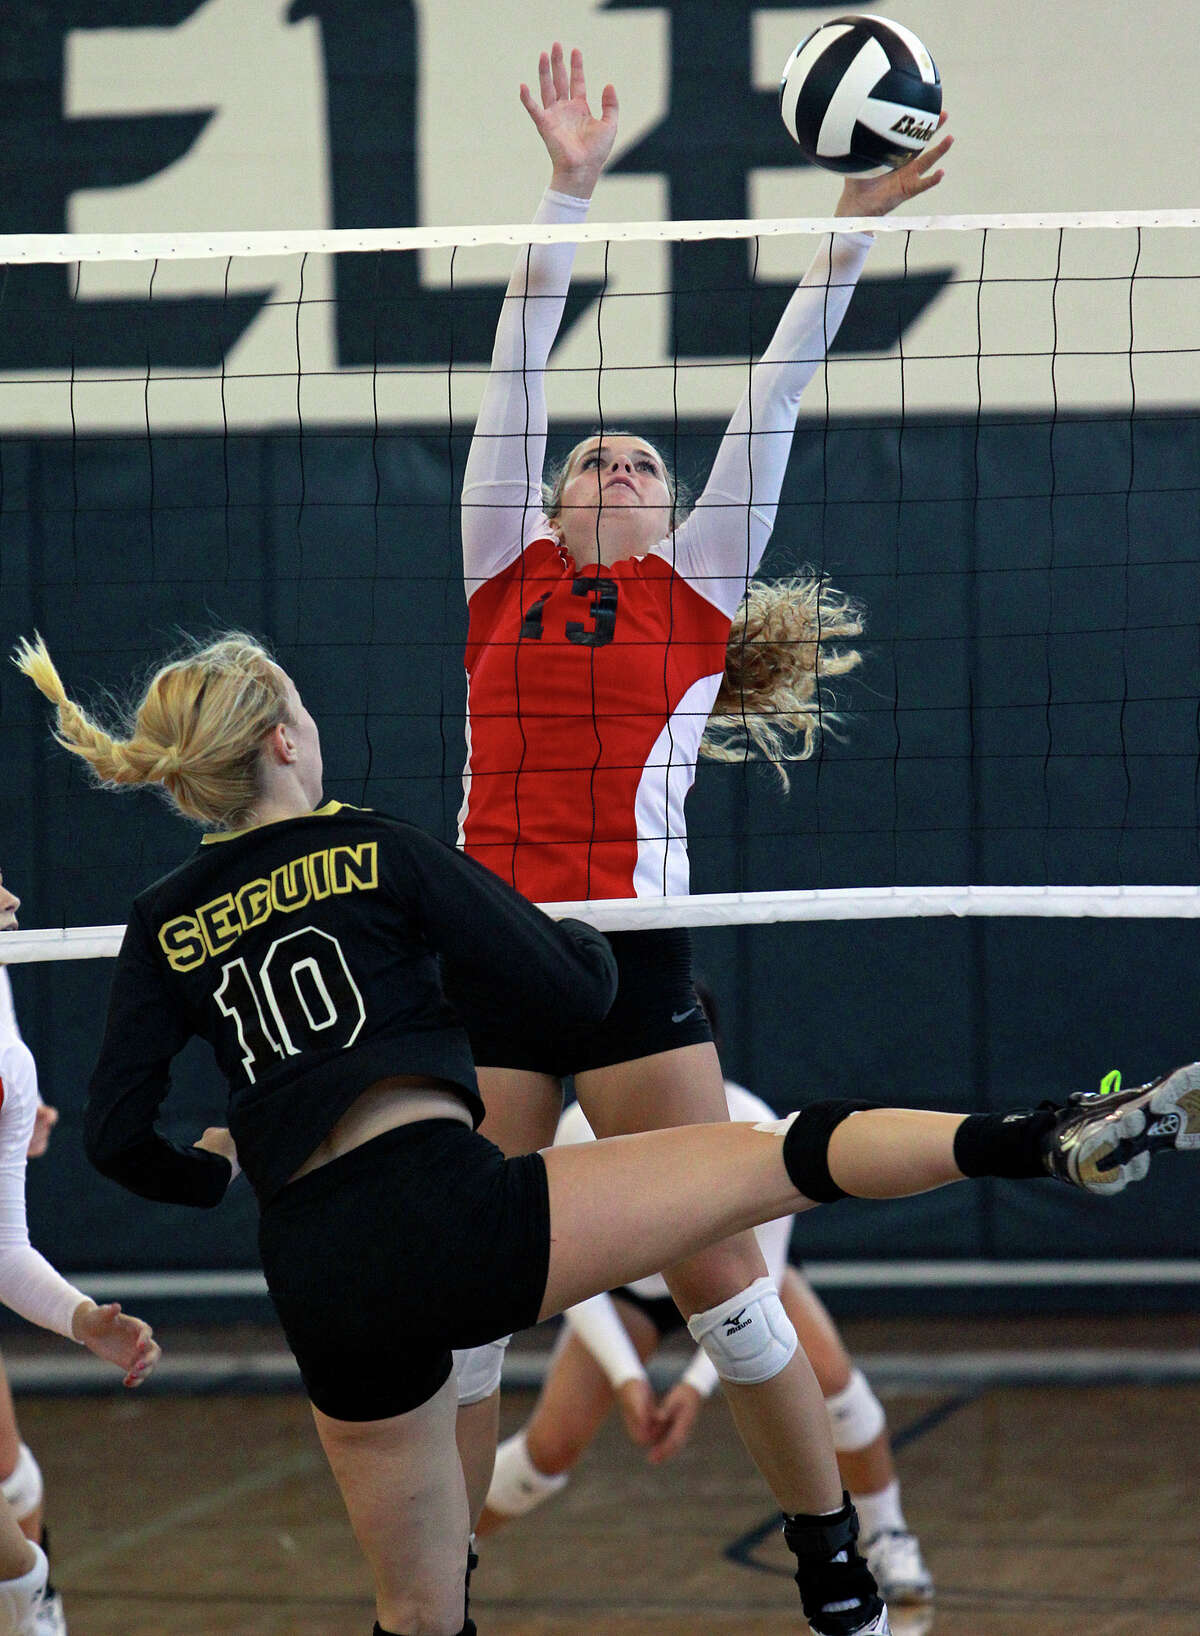 Katie Cavanaugh (13) stops a shot by Erin Moore as New Braunfels Canyon beats Seguin 3-0 at Steele High School gym on Tuesday, Aug. 14, 2012.